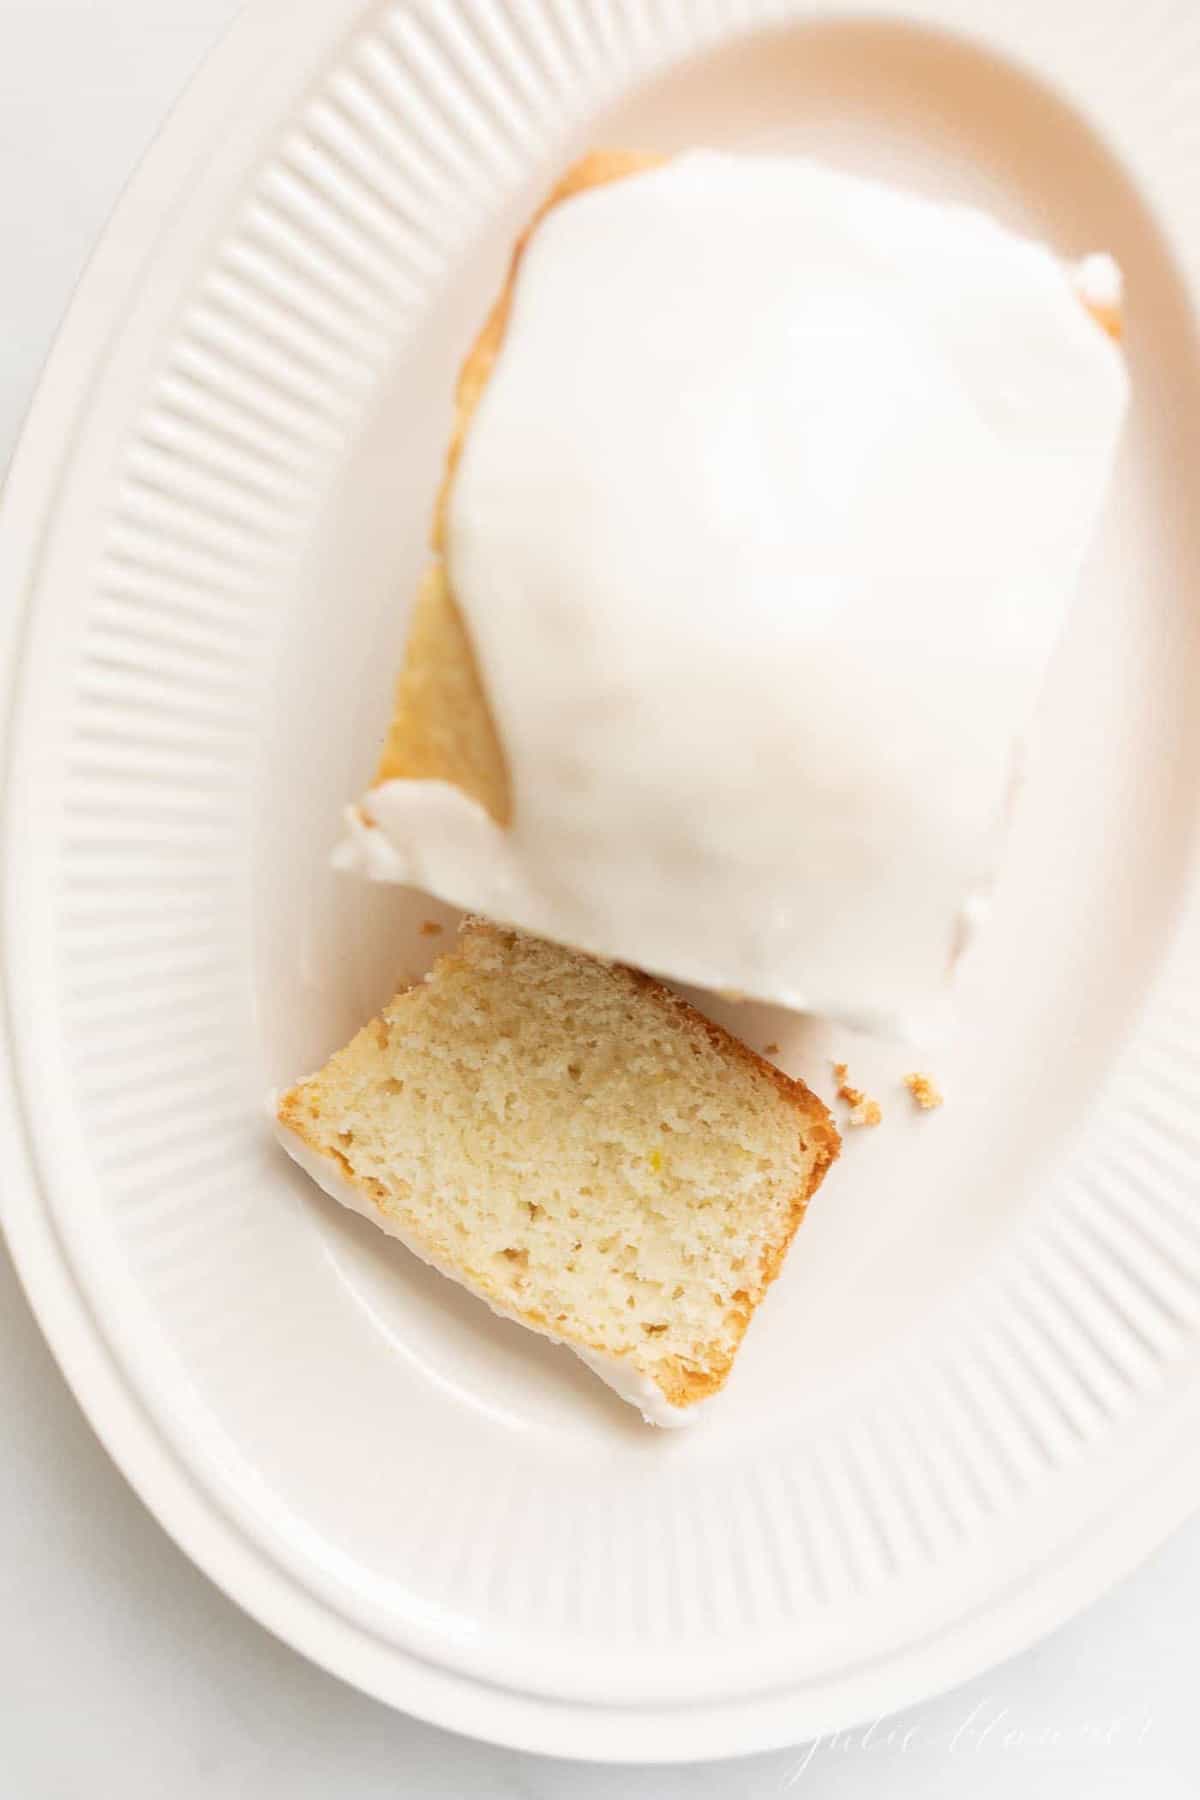 A loaf of iced lemon quick bread, one slice cut on an ivory platter.